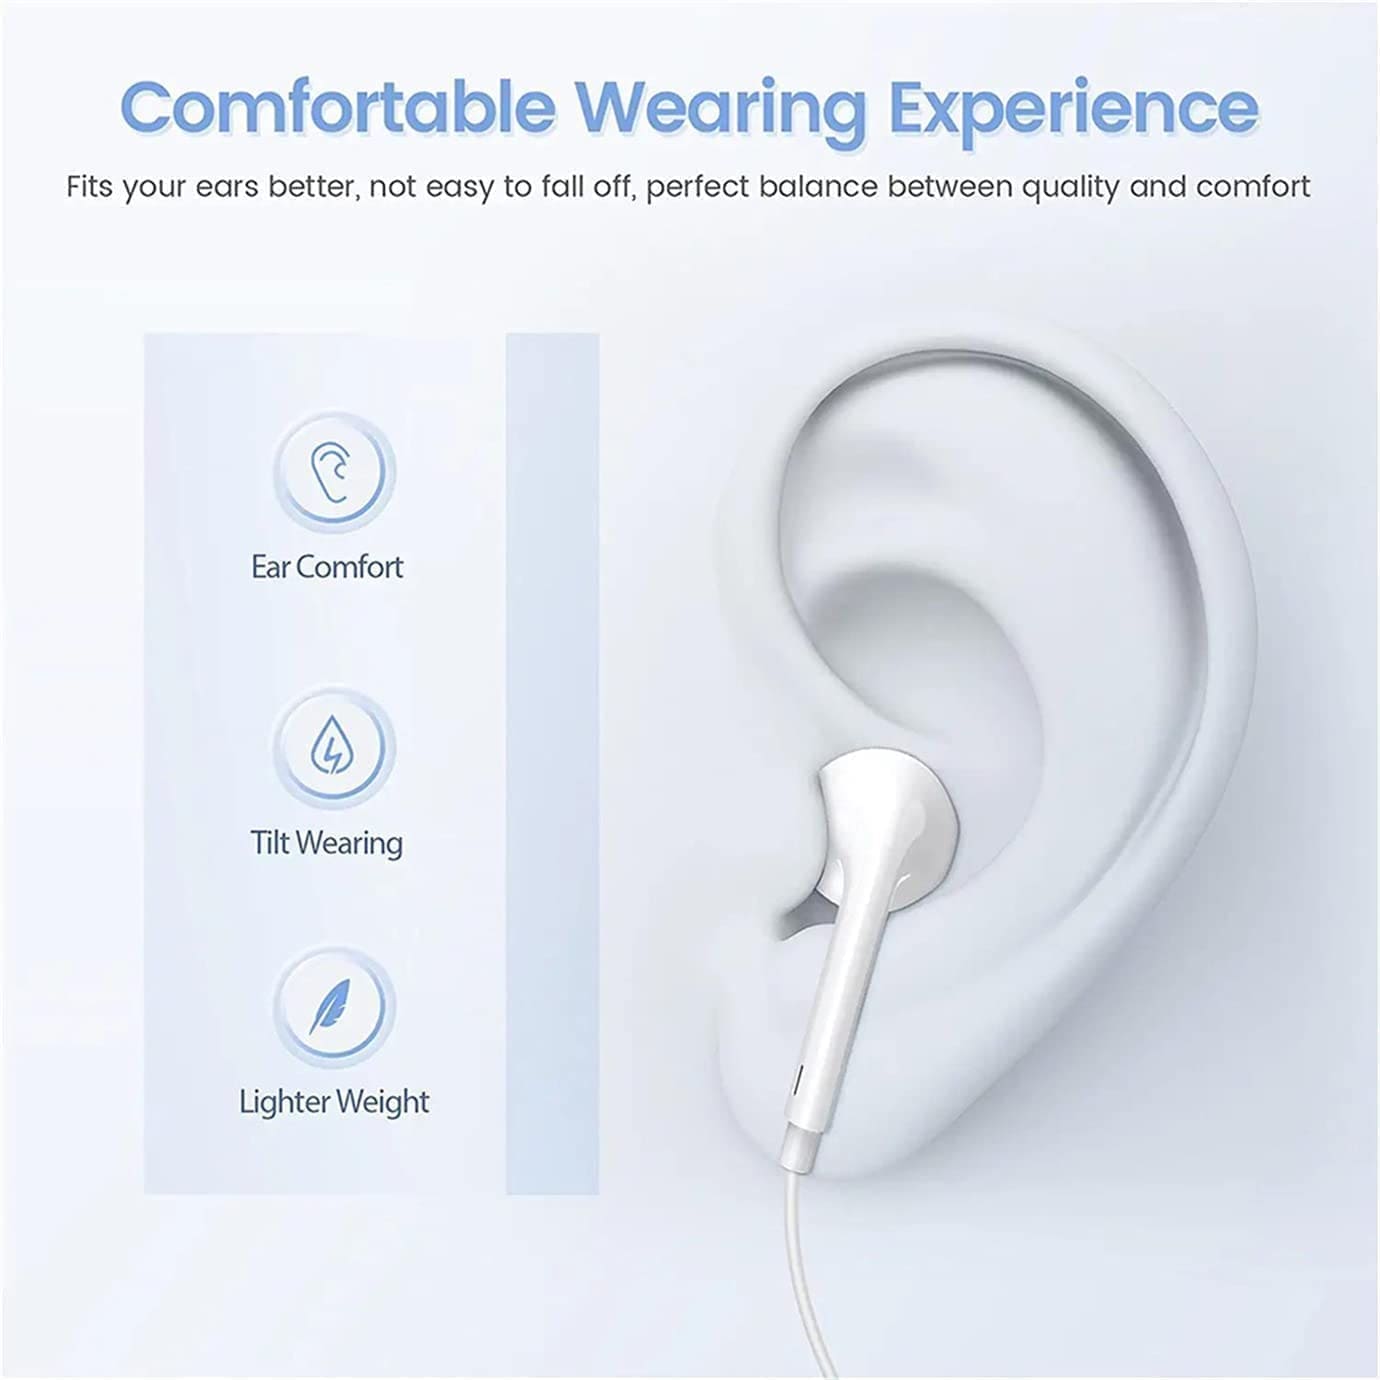 2 Pack-Apple Earbuds with 3.5mm Plug Wired Headphones/Earphones【with Apple MFi Certified】 Built-in Microphone & Volume Control Compatible with iPhone,iPad,Computer,Android Most 3.5mm Audio Devices